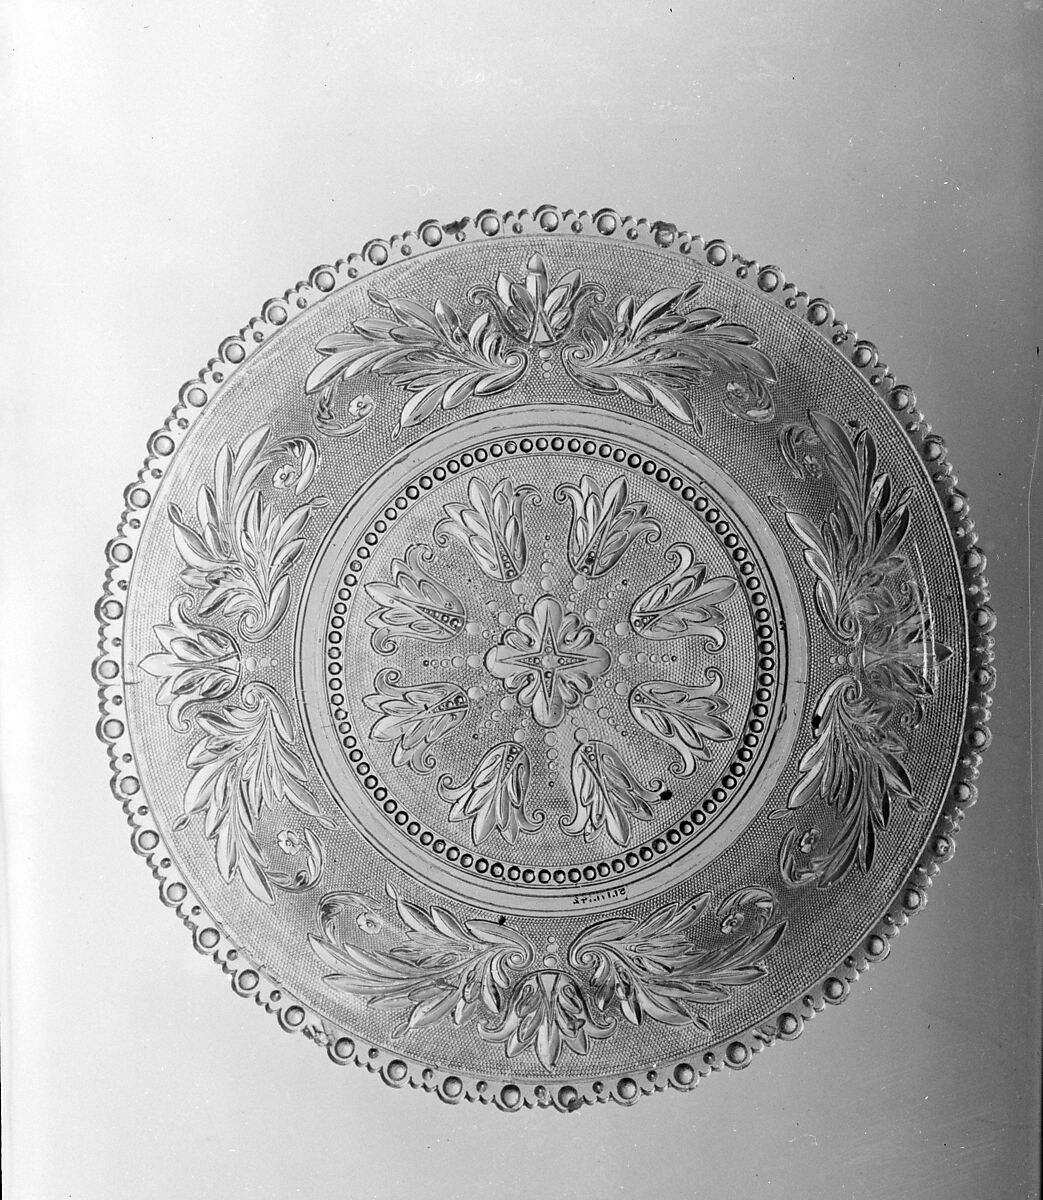 Bowl, Lacy pressed glass, American 